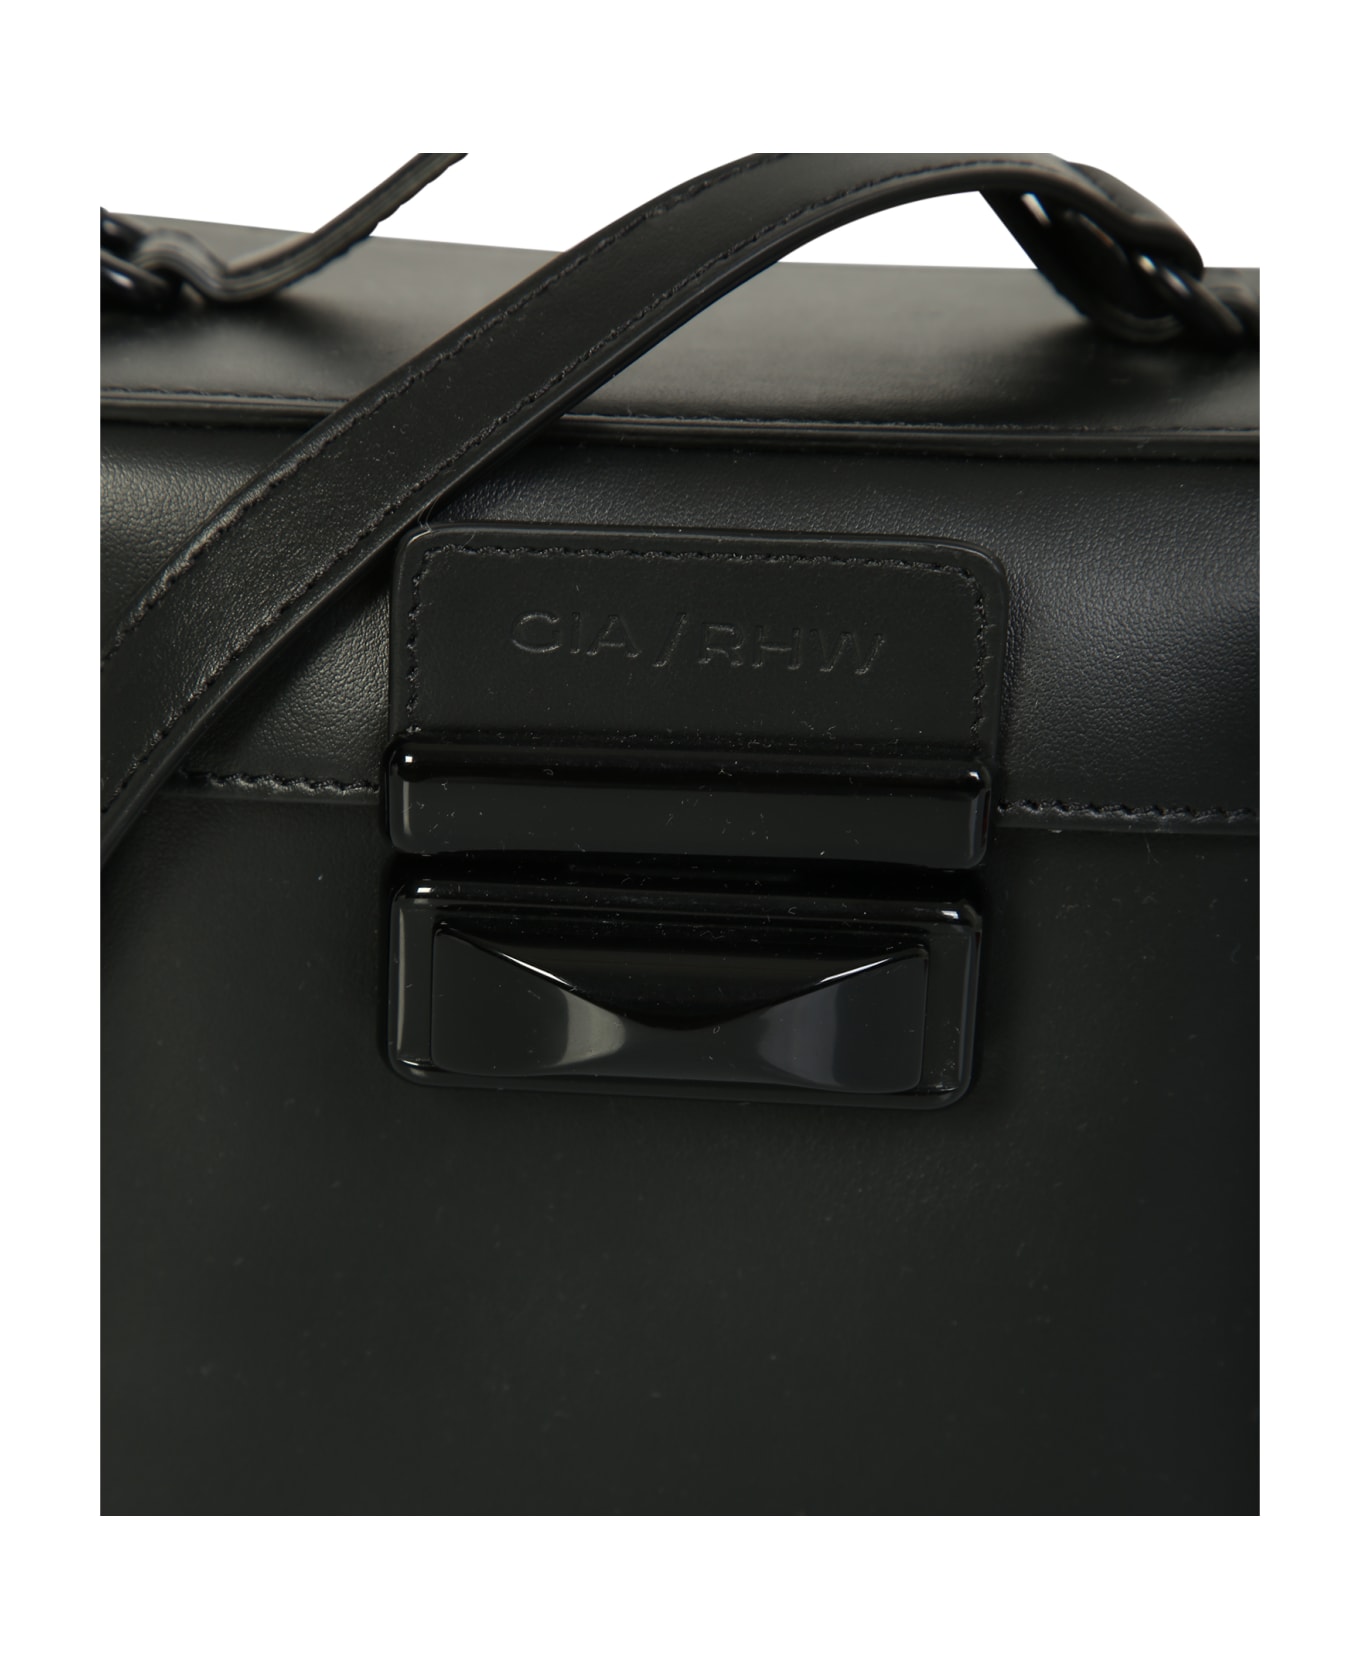 GIA BORGHINI Combining Practicality With Style, Gia Borghini Present This Tote Bag Featuring A Boxy Silhouette - Black